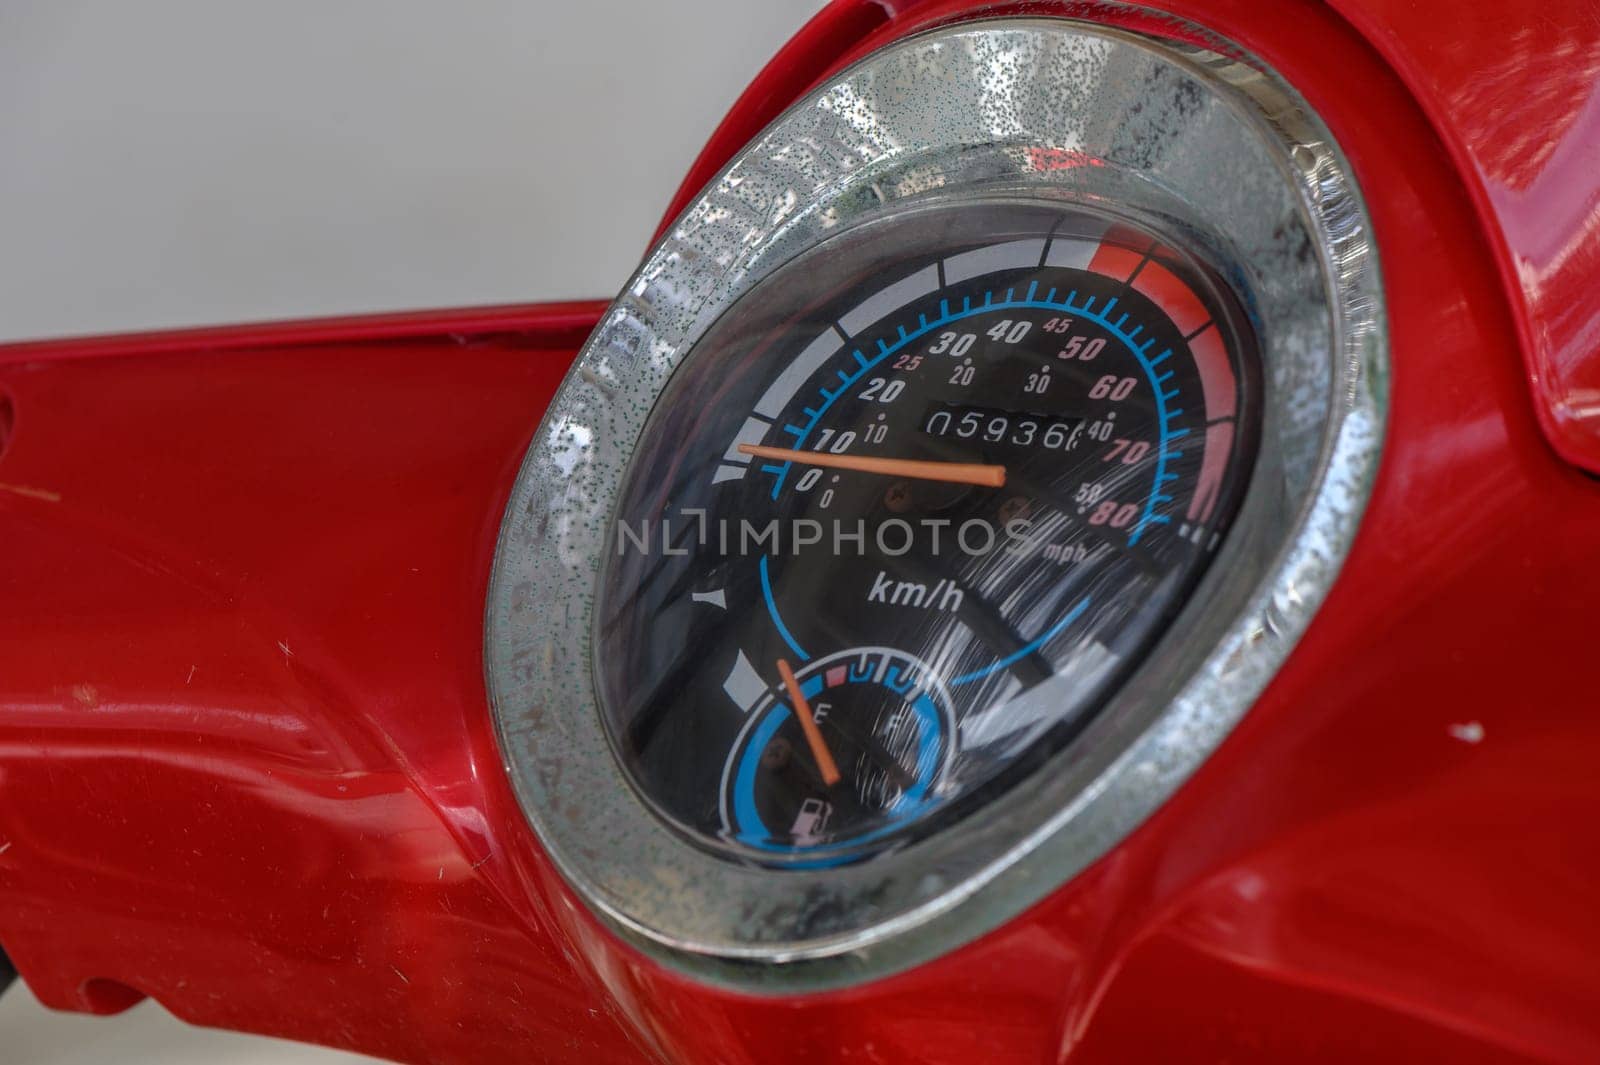 speedometer and instrument panel on a scooter